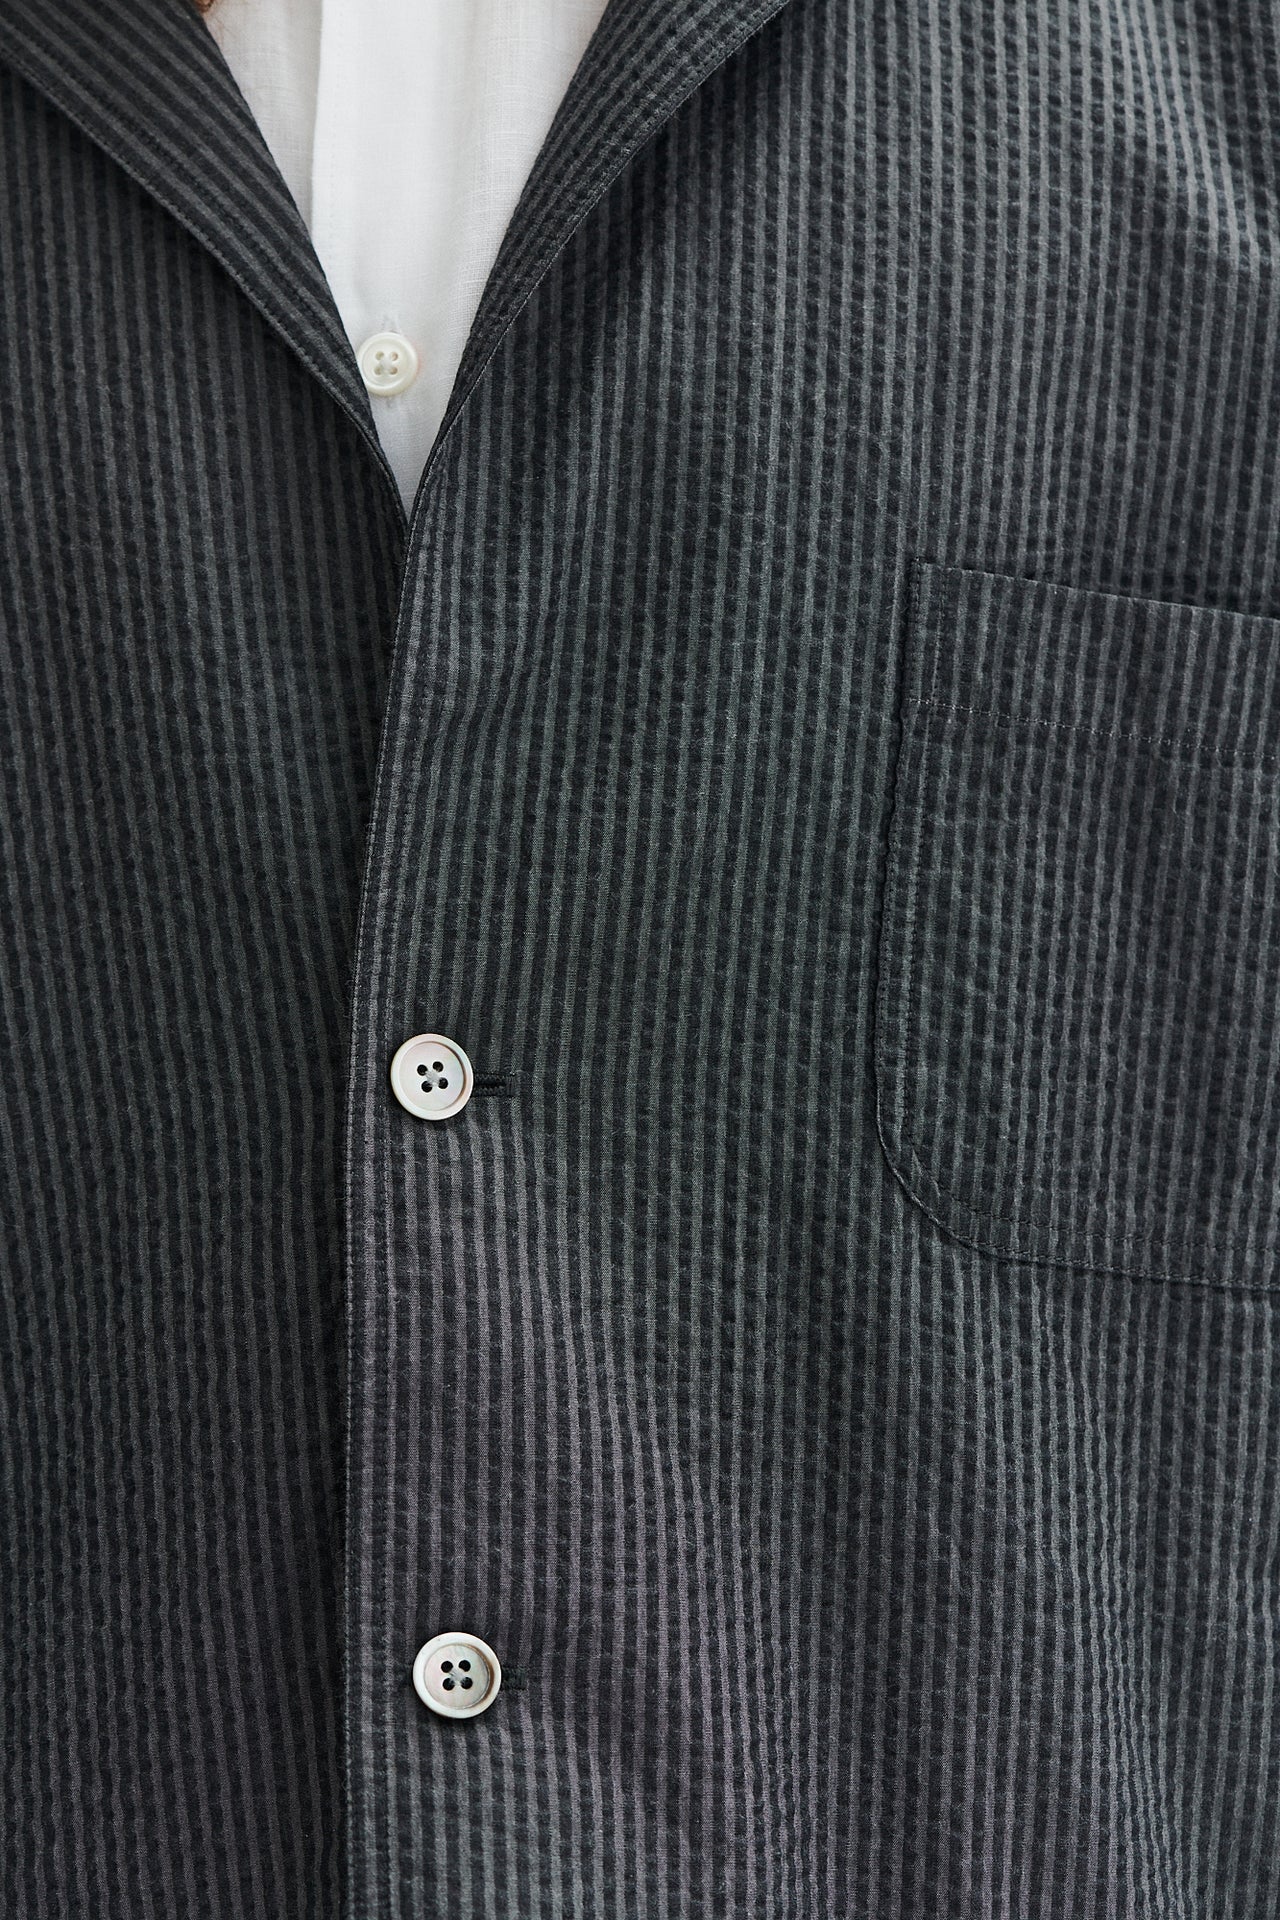 Sporting Jacket and Overshirt in a Tonal Grey Striped Portuguese Cotton Seersucker